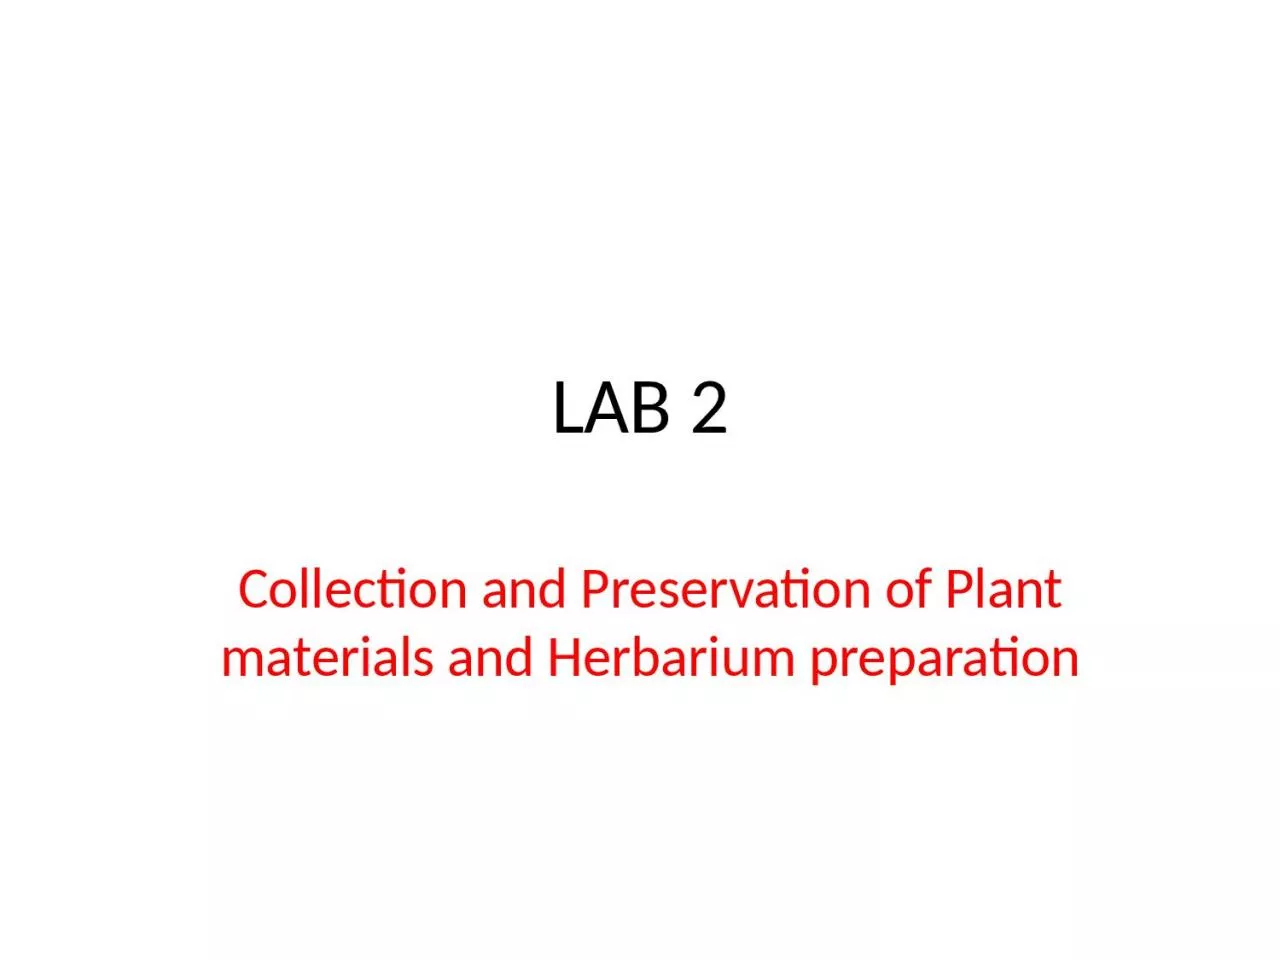 LAB 2 Collection and Preservation of Plant materials and Herbarium preparation